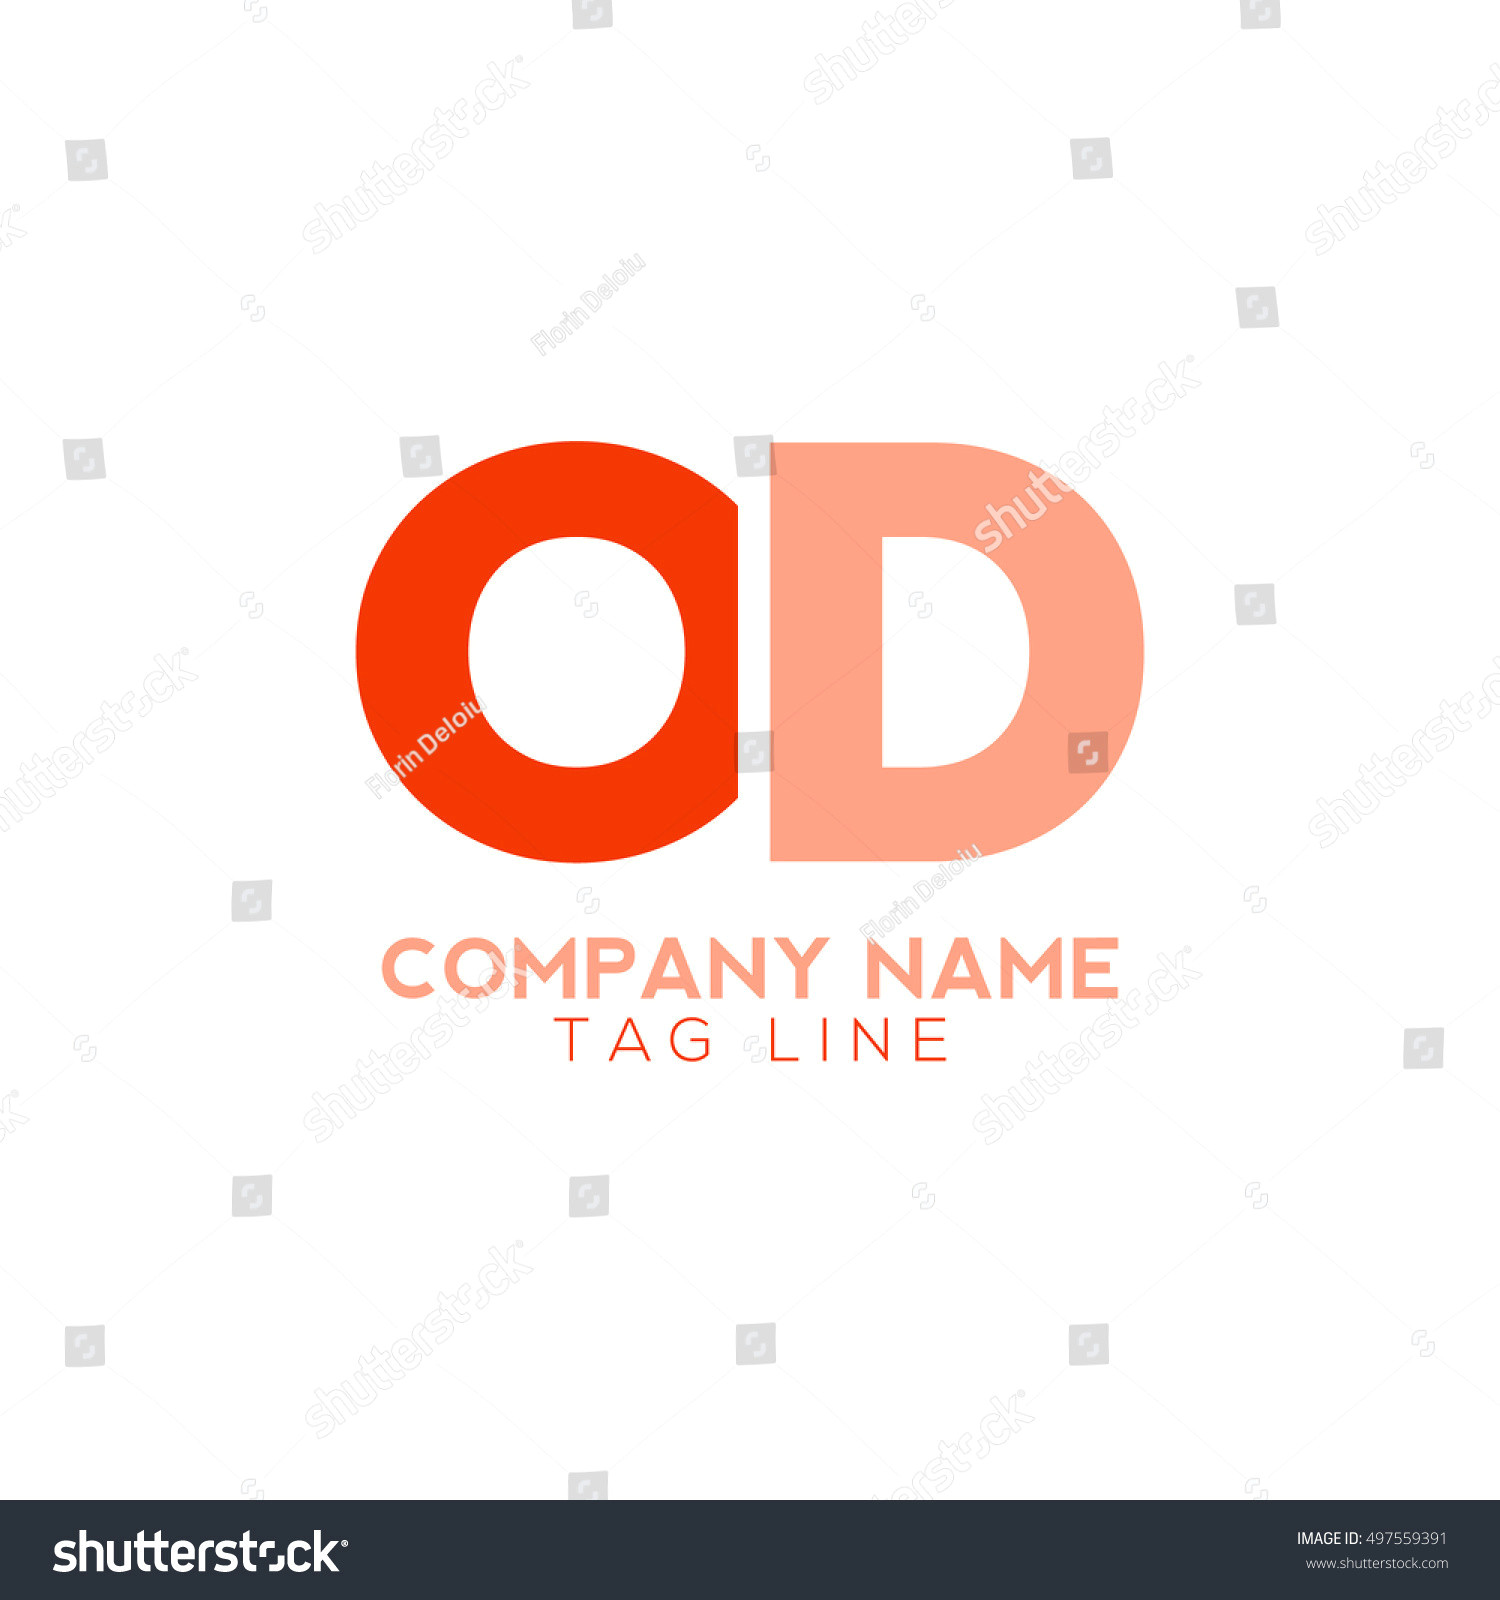 Easy Drawing Of Eid Cool Easy to Draw Logos Od Logo Stock Vector Shutterstock Prslide Com